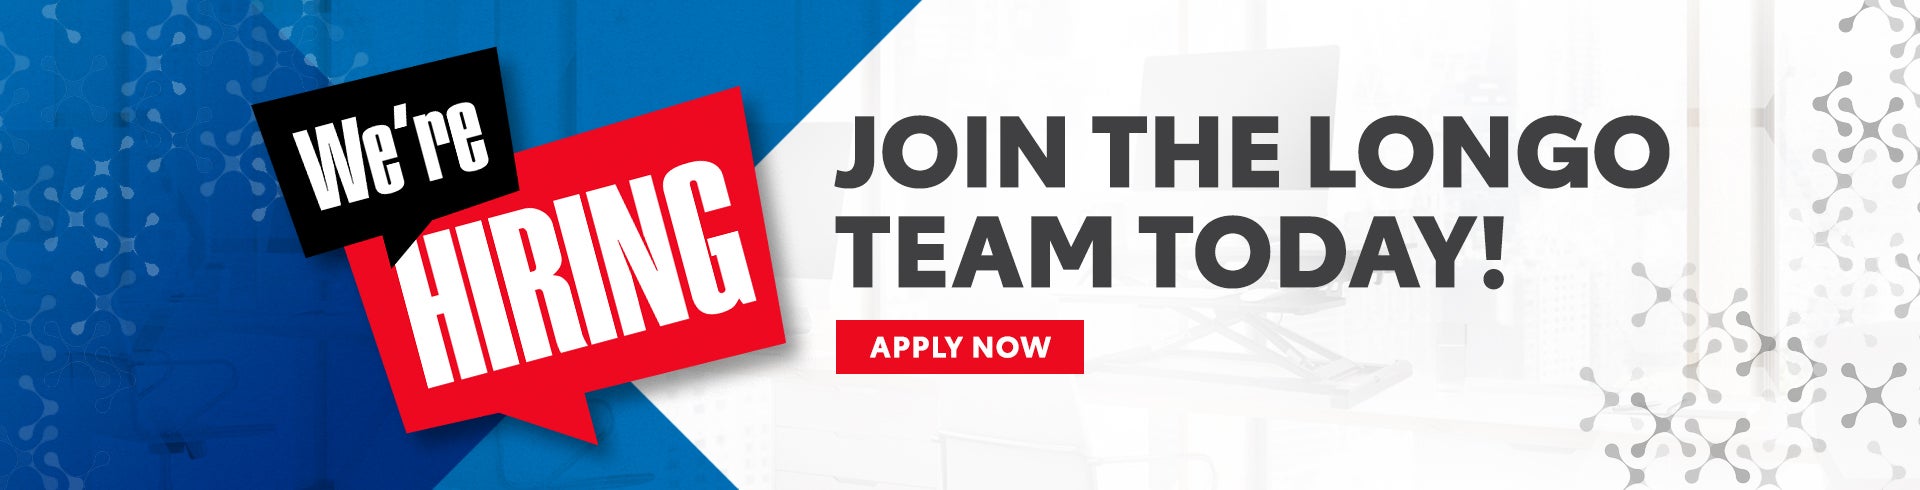 We're hiring - Join the Longo Team today!